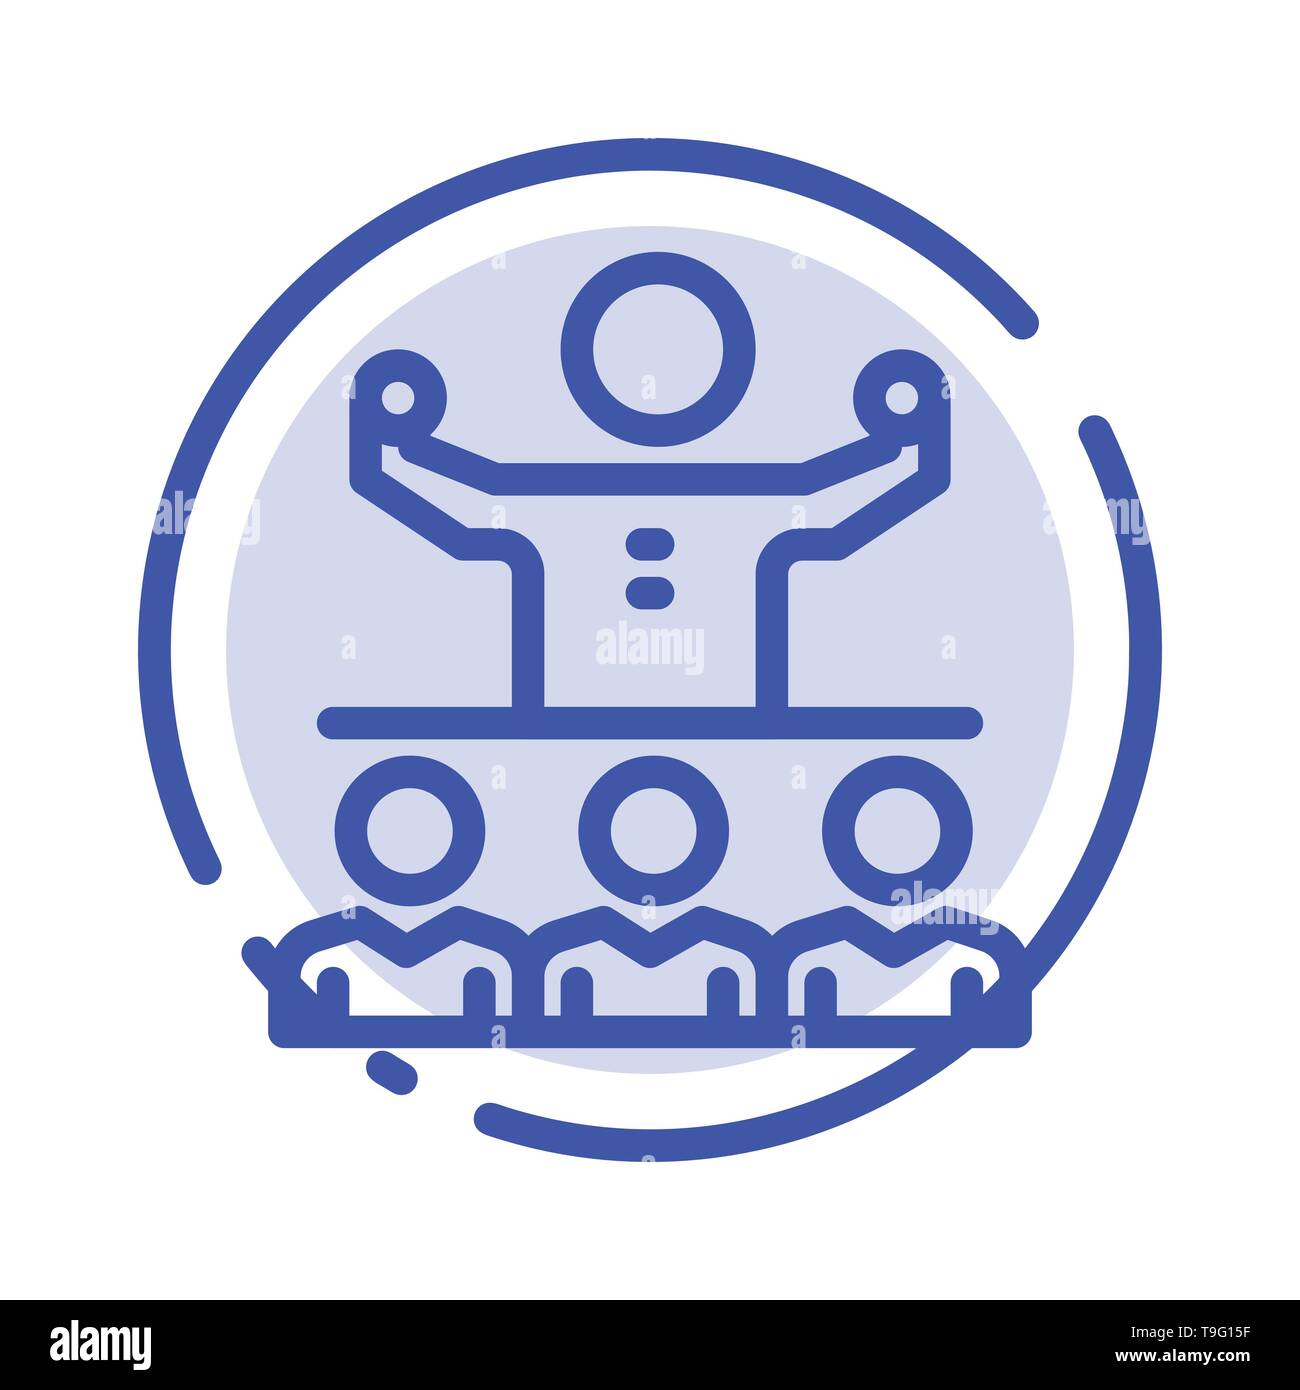 Encourage, Growth, Mentor, Mentorship, Team Blue Dotted Line Line Icon Stock Vector